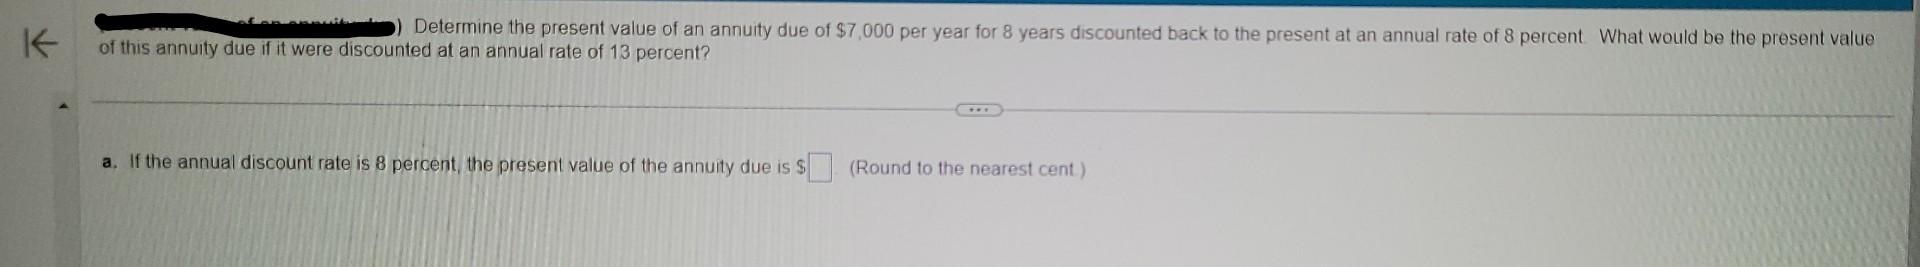 K Determine the present value of an annuity due of $7,000 per year for 8 years discounted back to the present